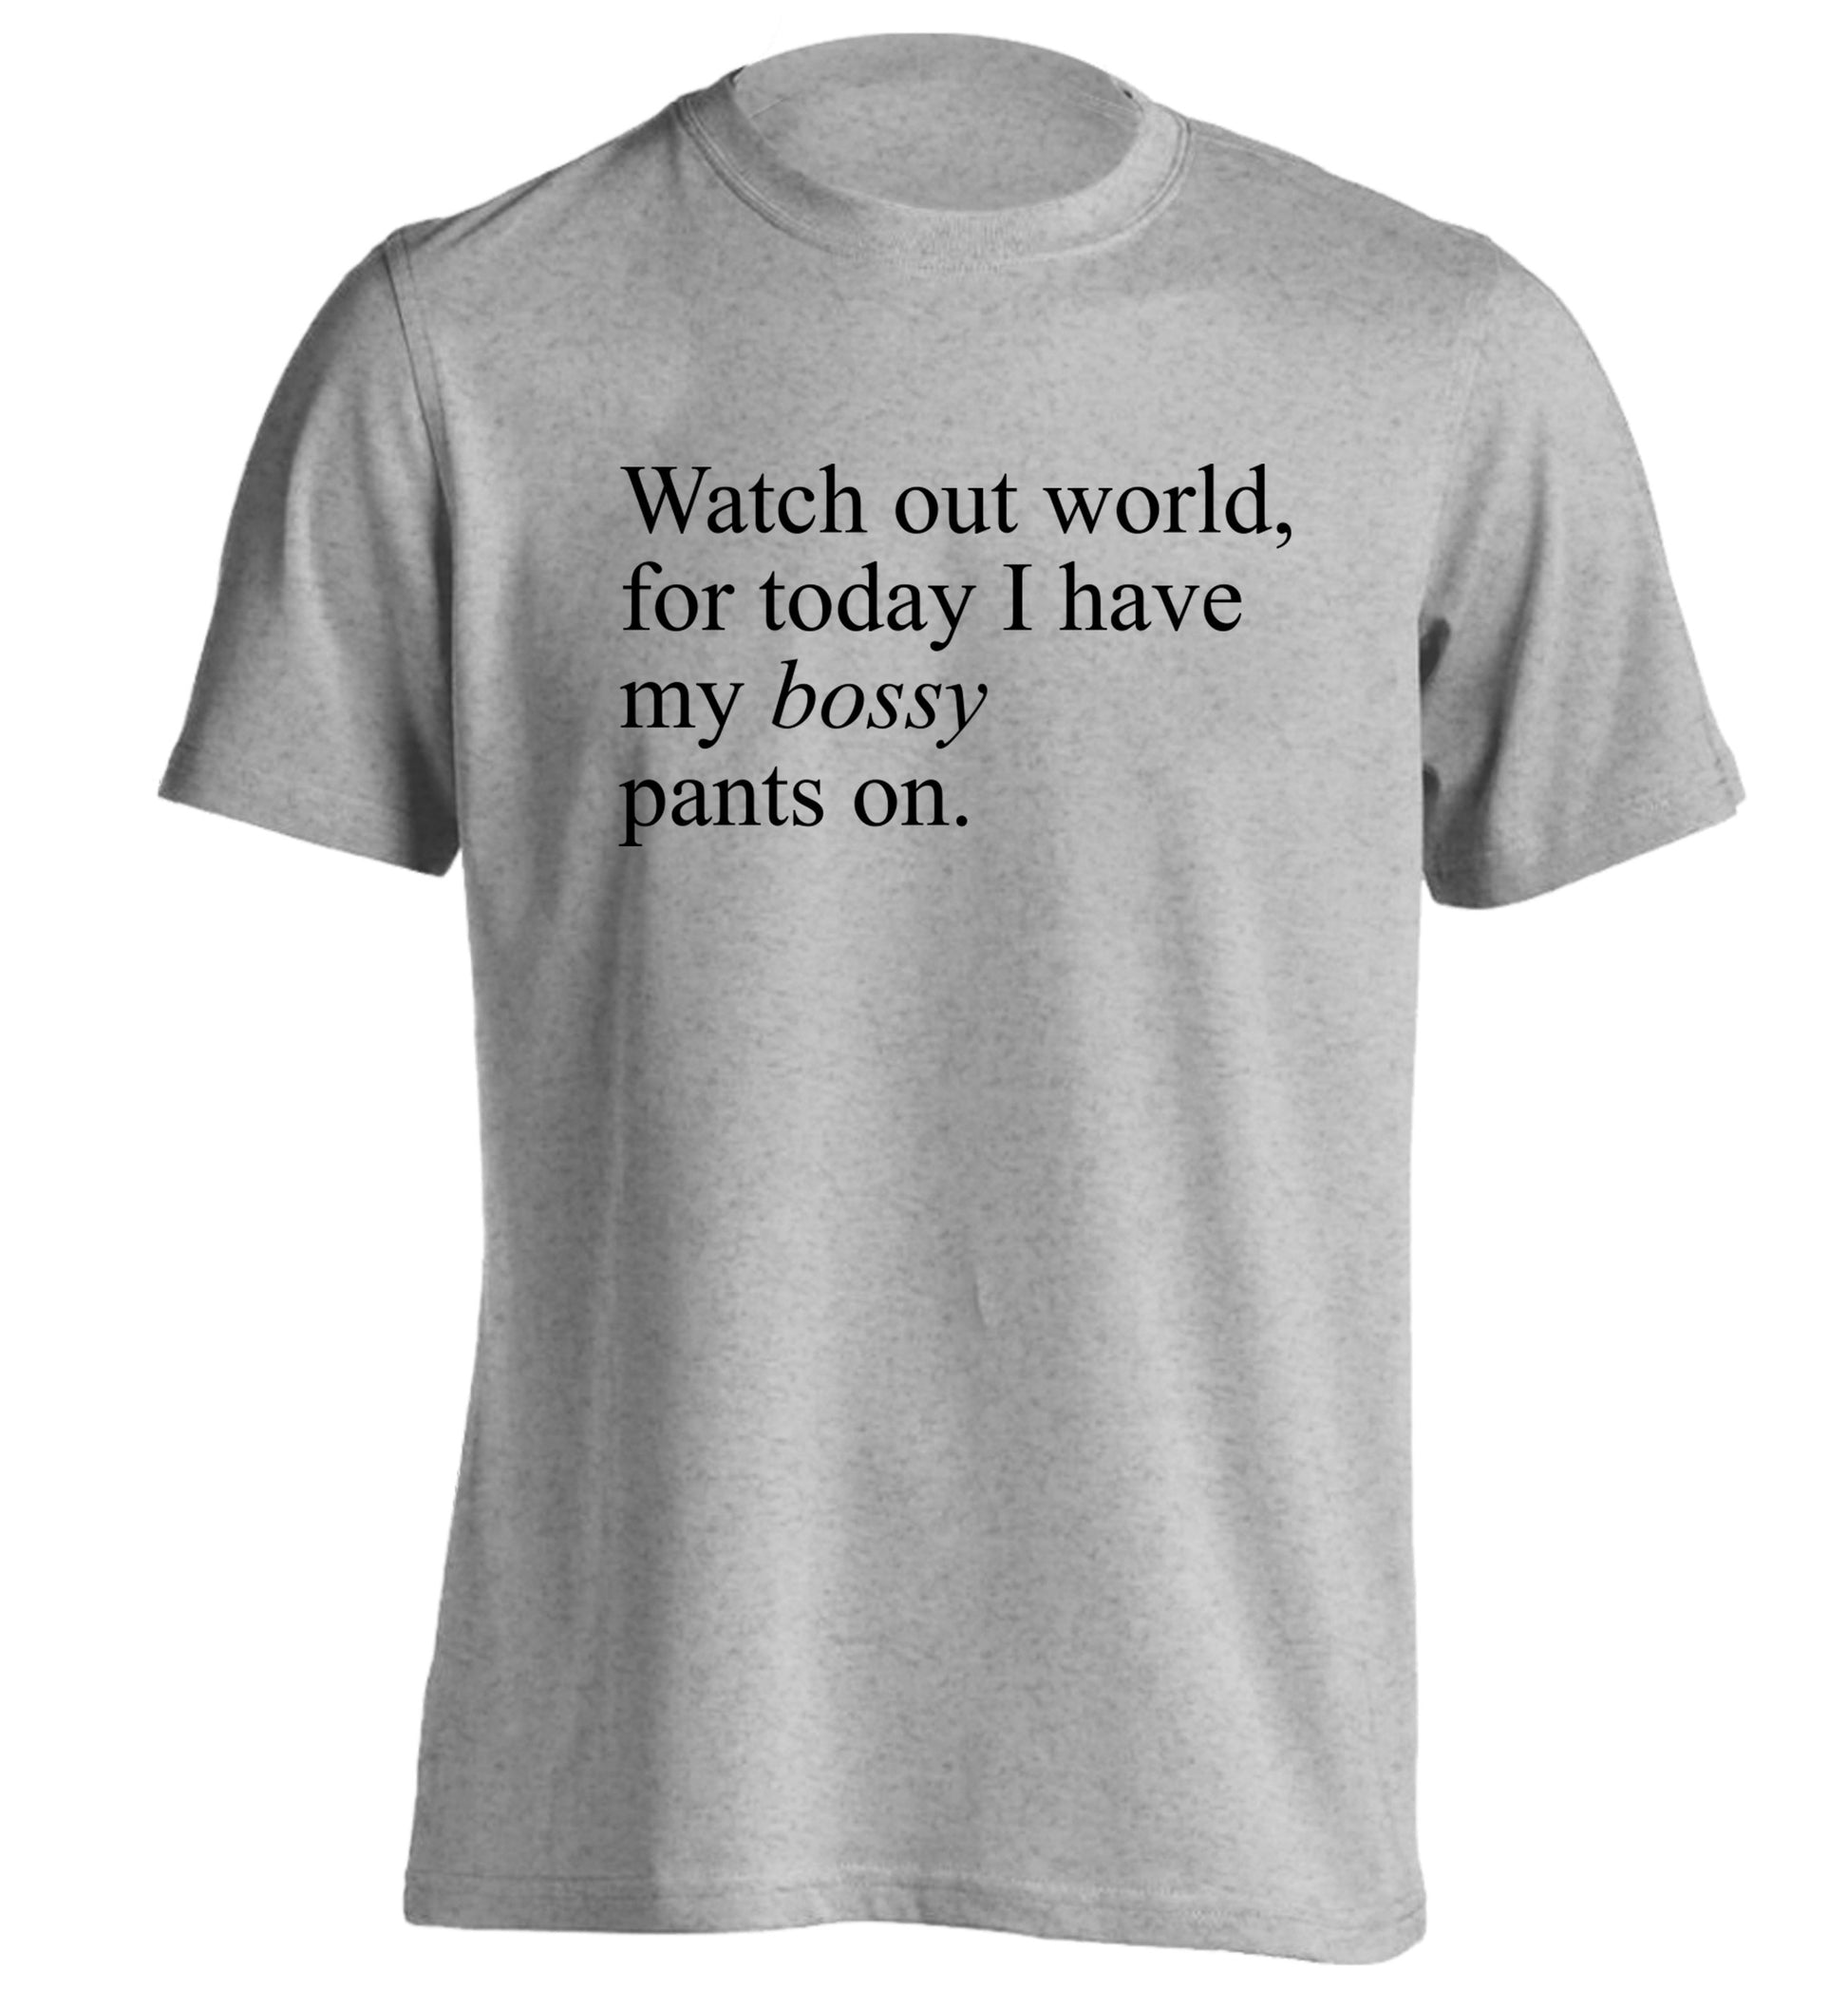 Watch out world, for today I have my bossy pants on adults unisex grey Tshirt 2XL